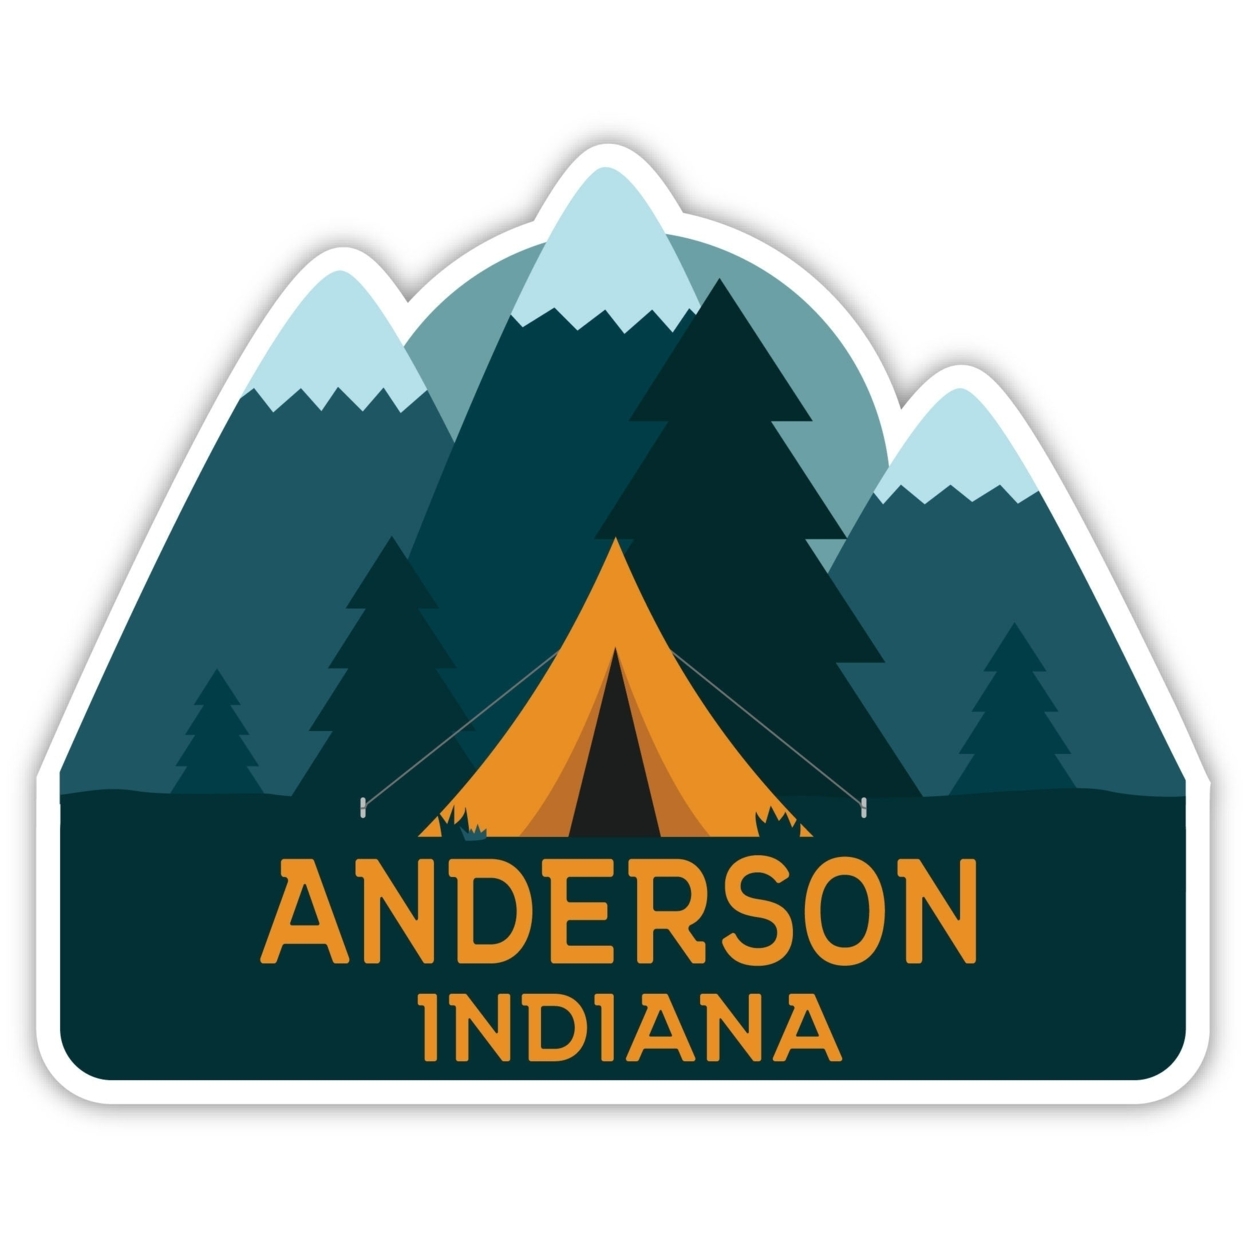 Anderson Indiana Souvenir Decorative Stickers (Choose Theme And Size) - Single Unit, 2-Inch, Tent